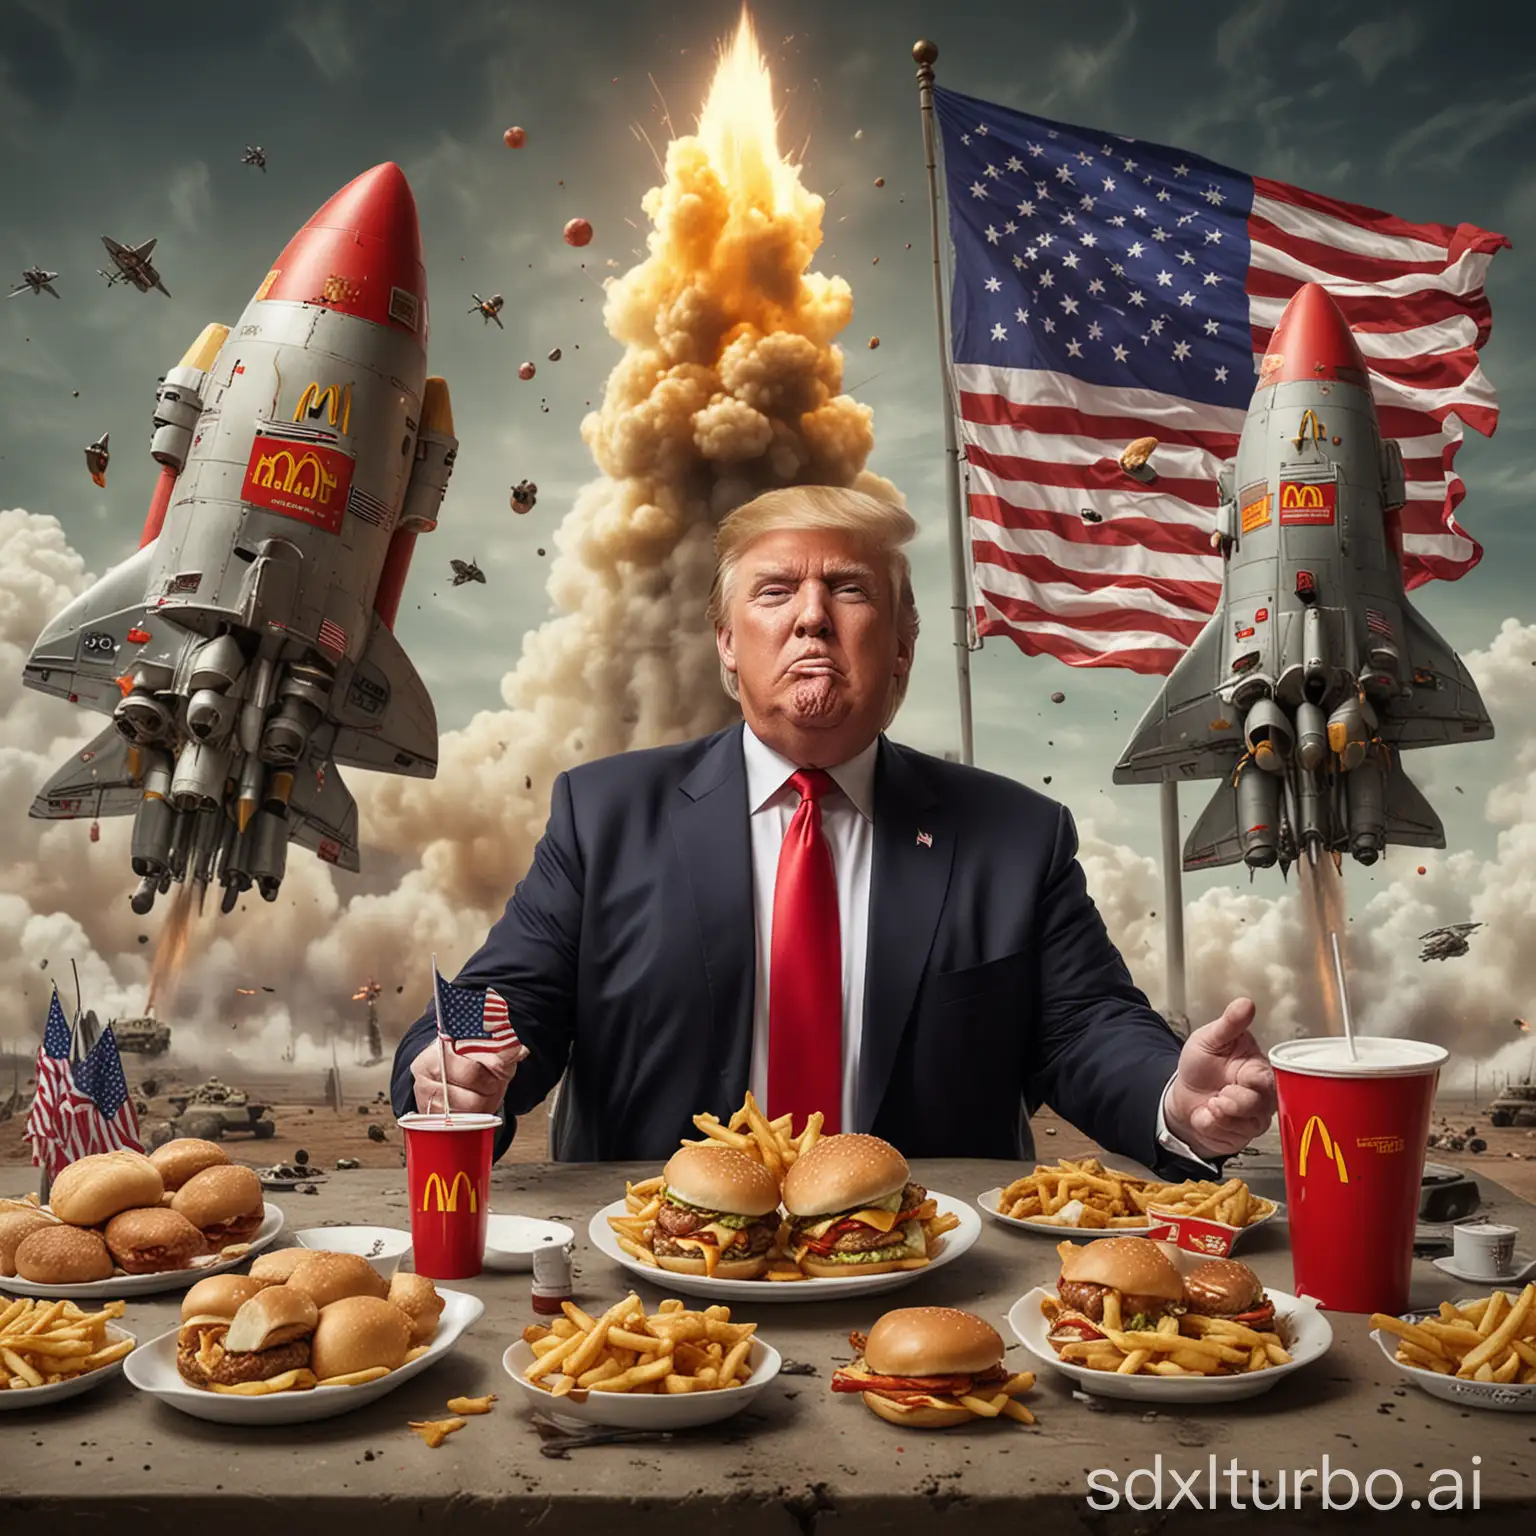 realistic image of donald trump, fat, eating mcdonalds, with large realistic rockets and nuclear warheads launching behind them, flying overhead, with the American flag as the backdrop.